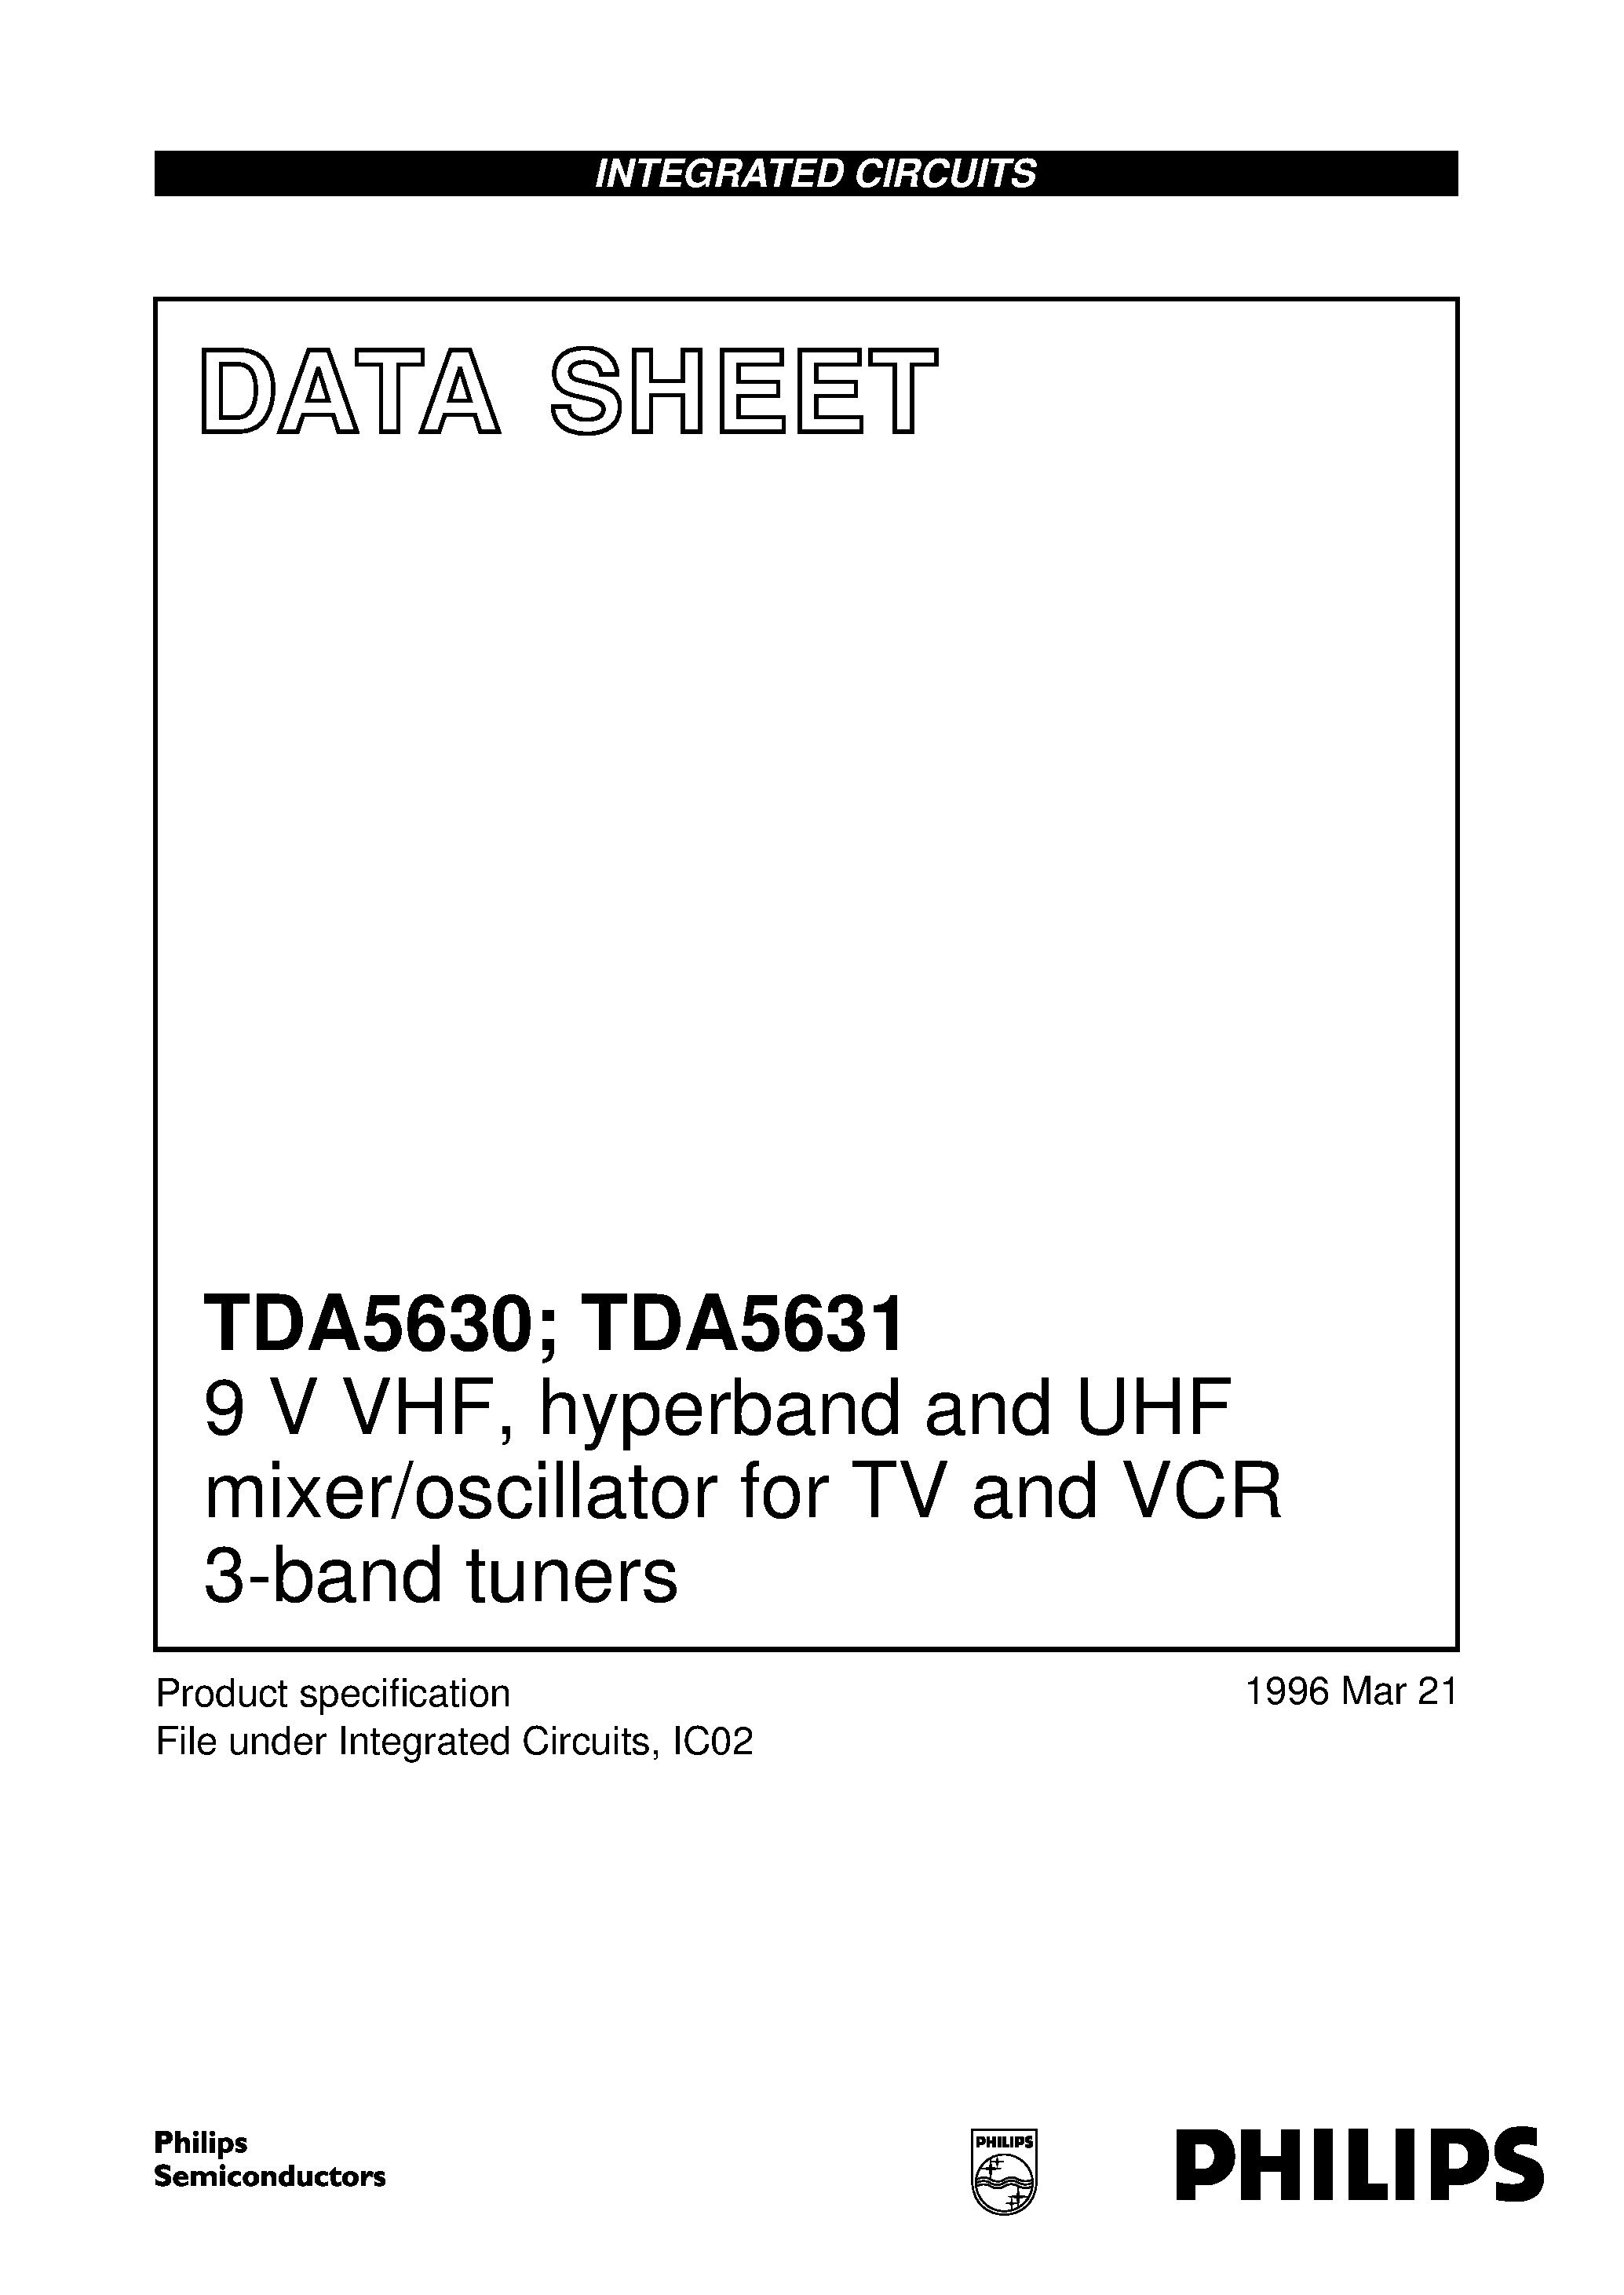 Datasheet TDA5630 - 9 V VHF/ hyperband and UHF mixer/oscillator for TV and VCR 3-band tuners page 1